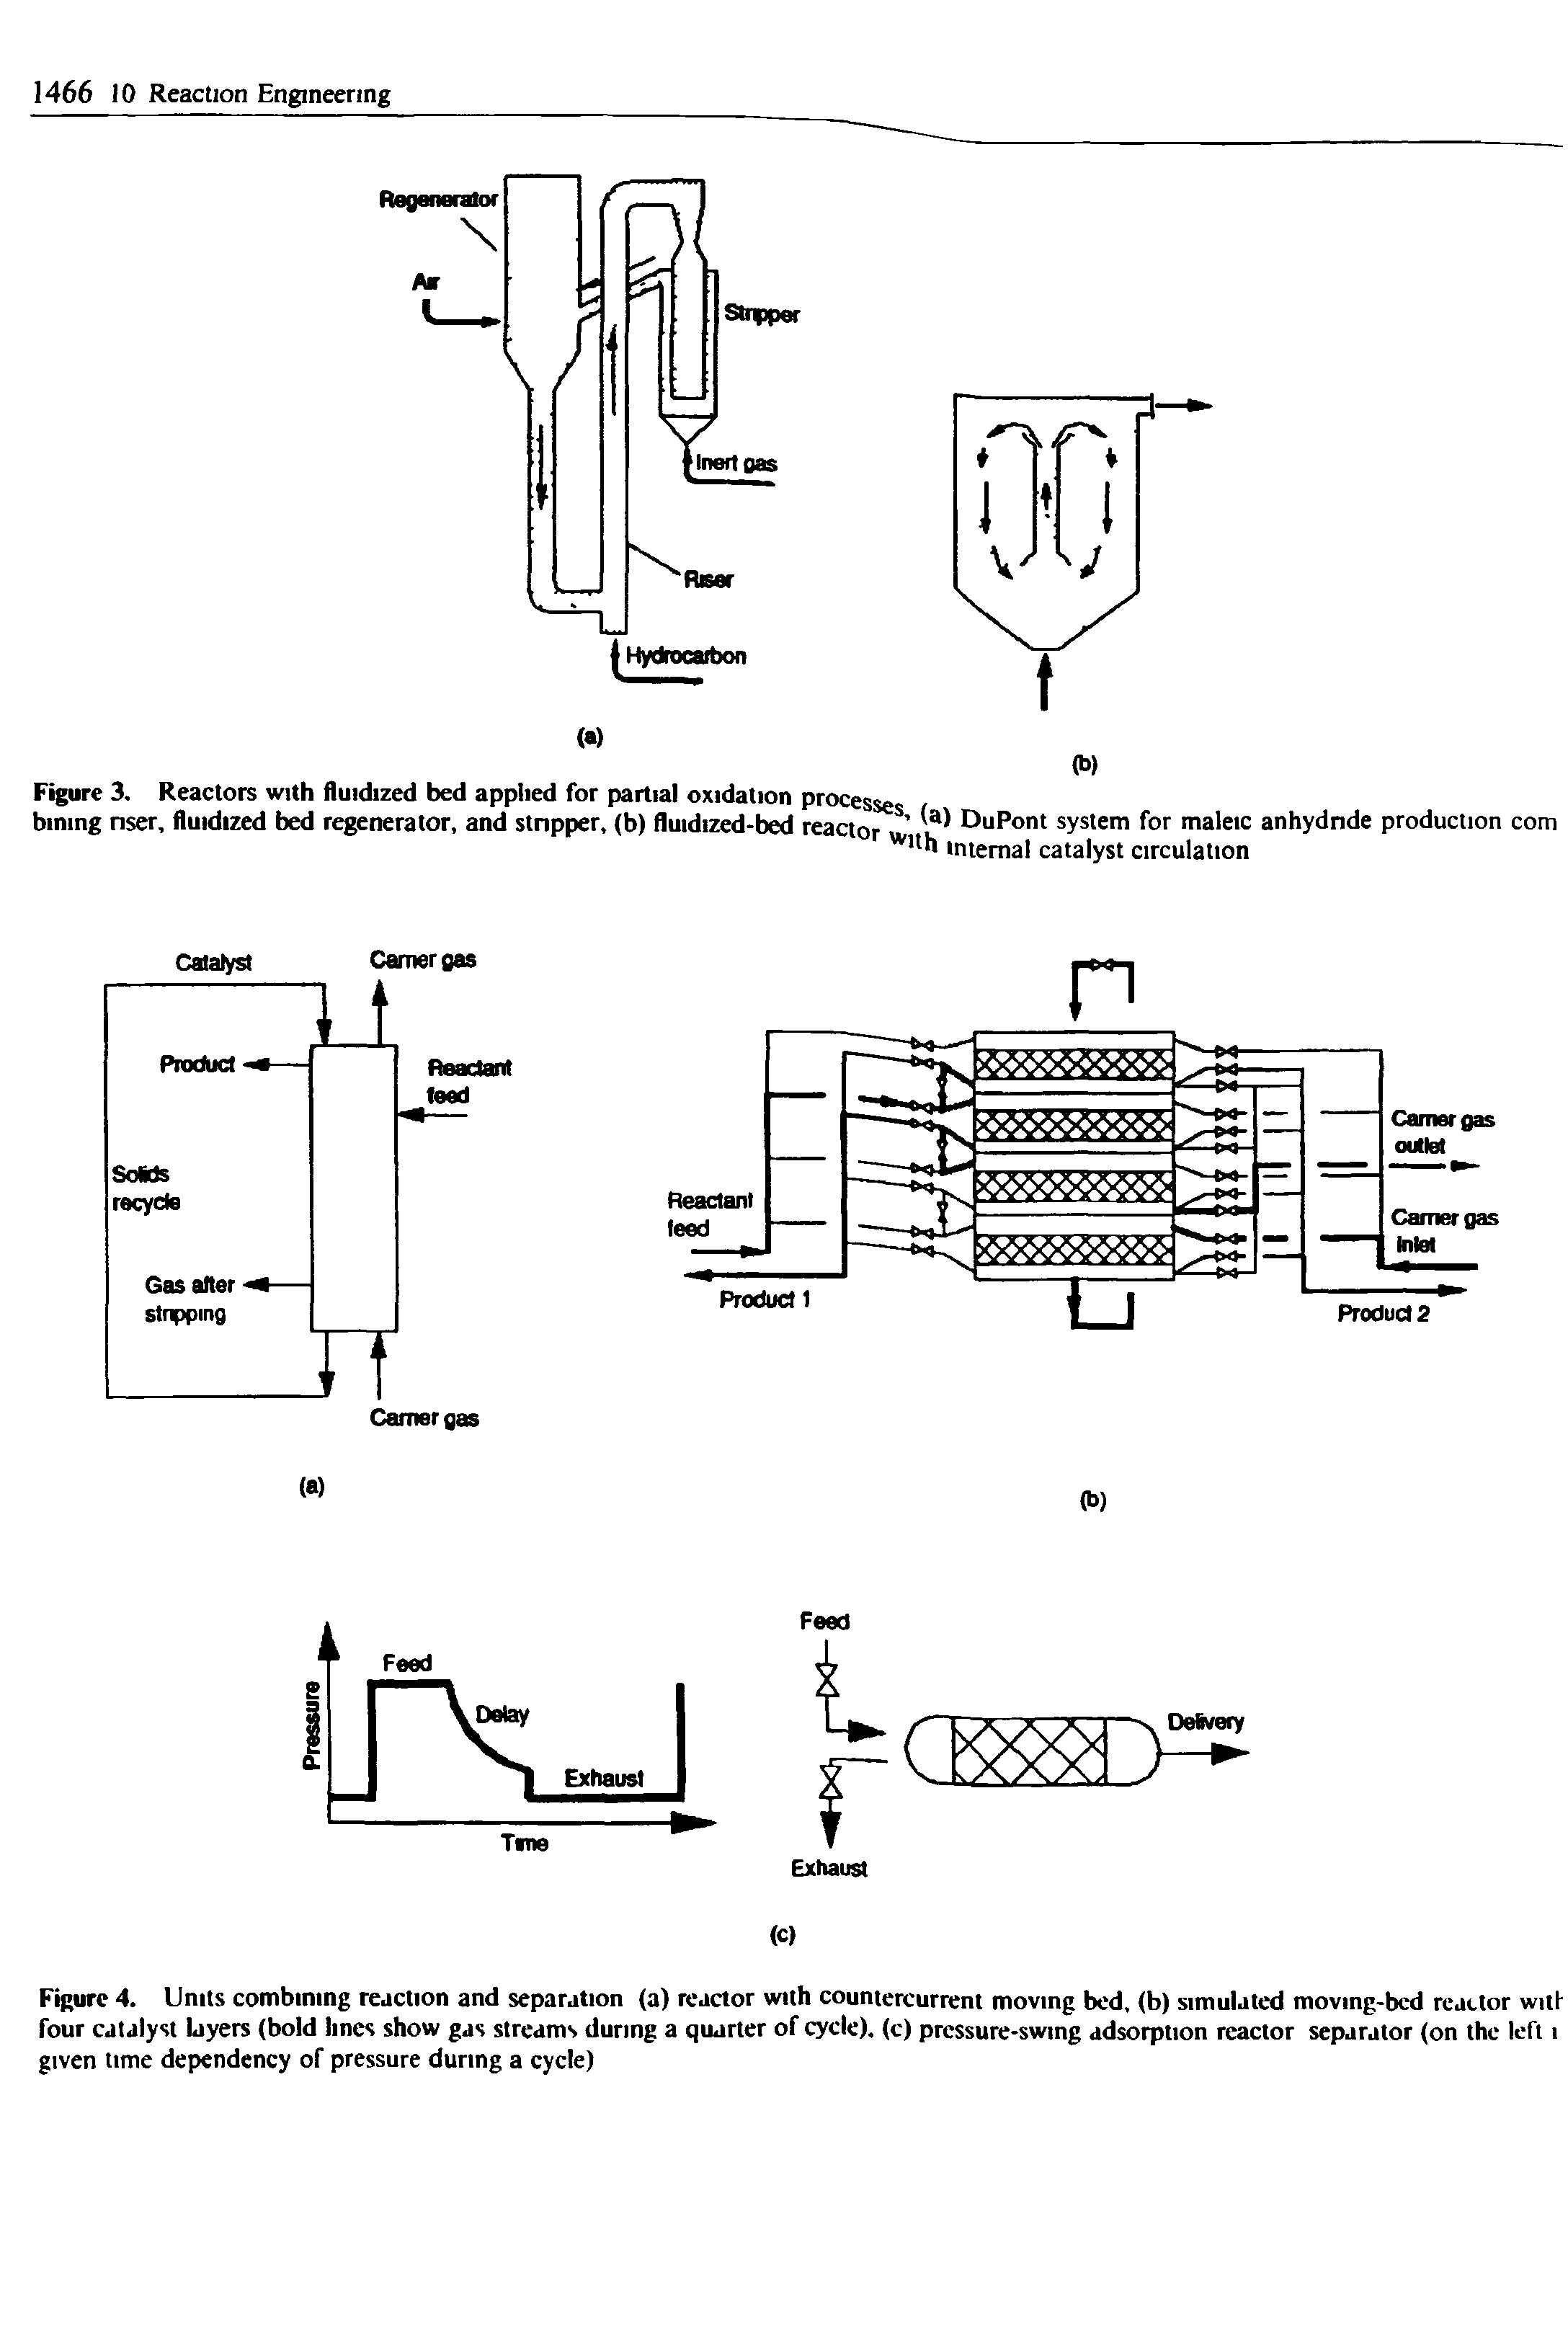 Figure 4. Units combining reaction and separation (a) reactor with countercurrent moving bed, (b) simulated moving-bed reactor with four catalyst layers (bold lines show gas streams during a quarter of cycle), (c) pressure-swing adsorption reactor separator (on the left i given time dependency of pressure during a cycle)...